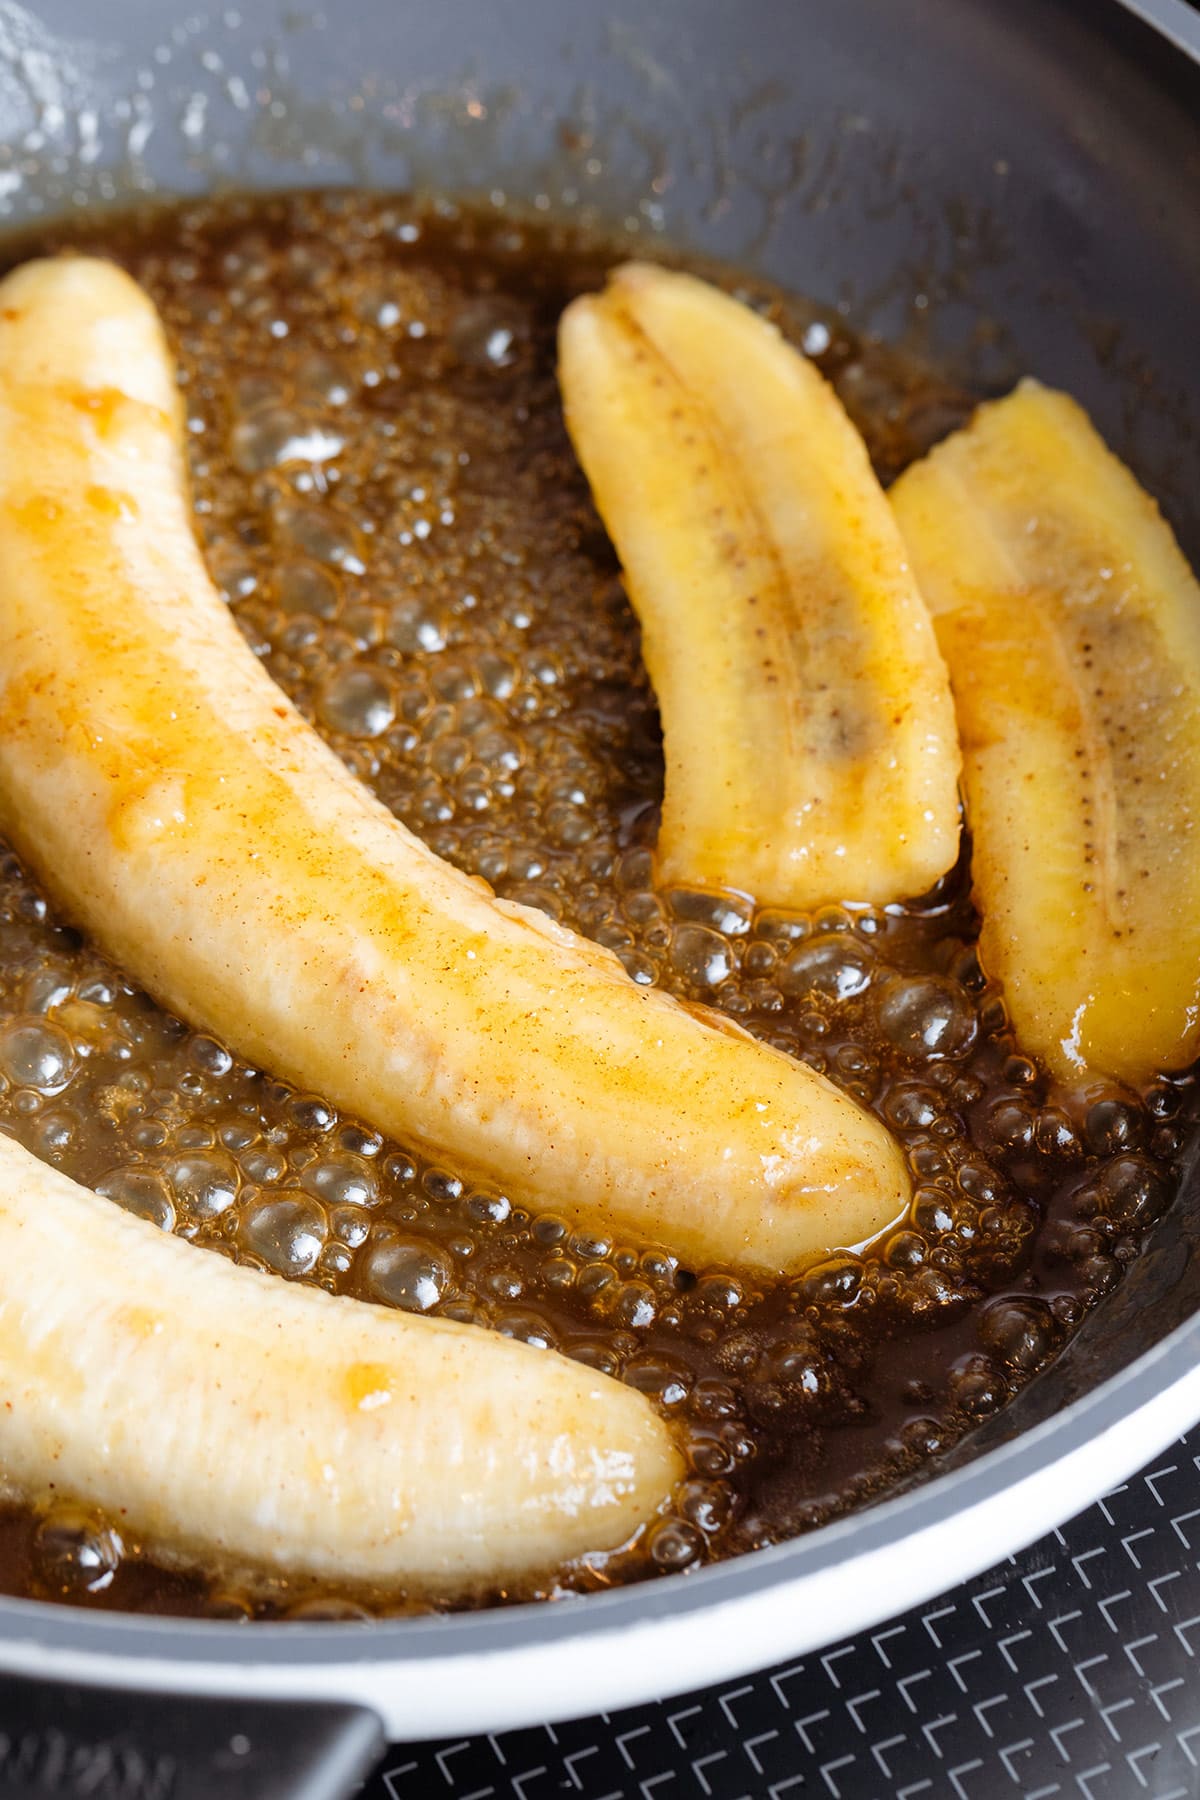 Bananas cooking with butter and maple syrup in a skillet.